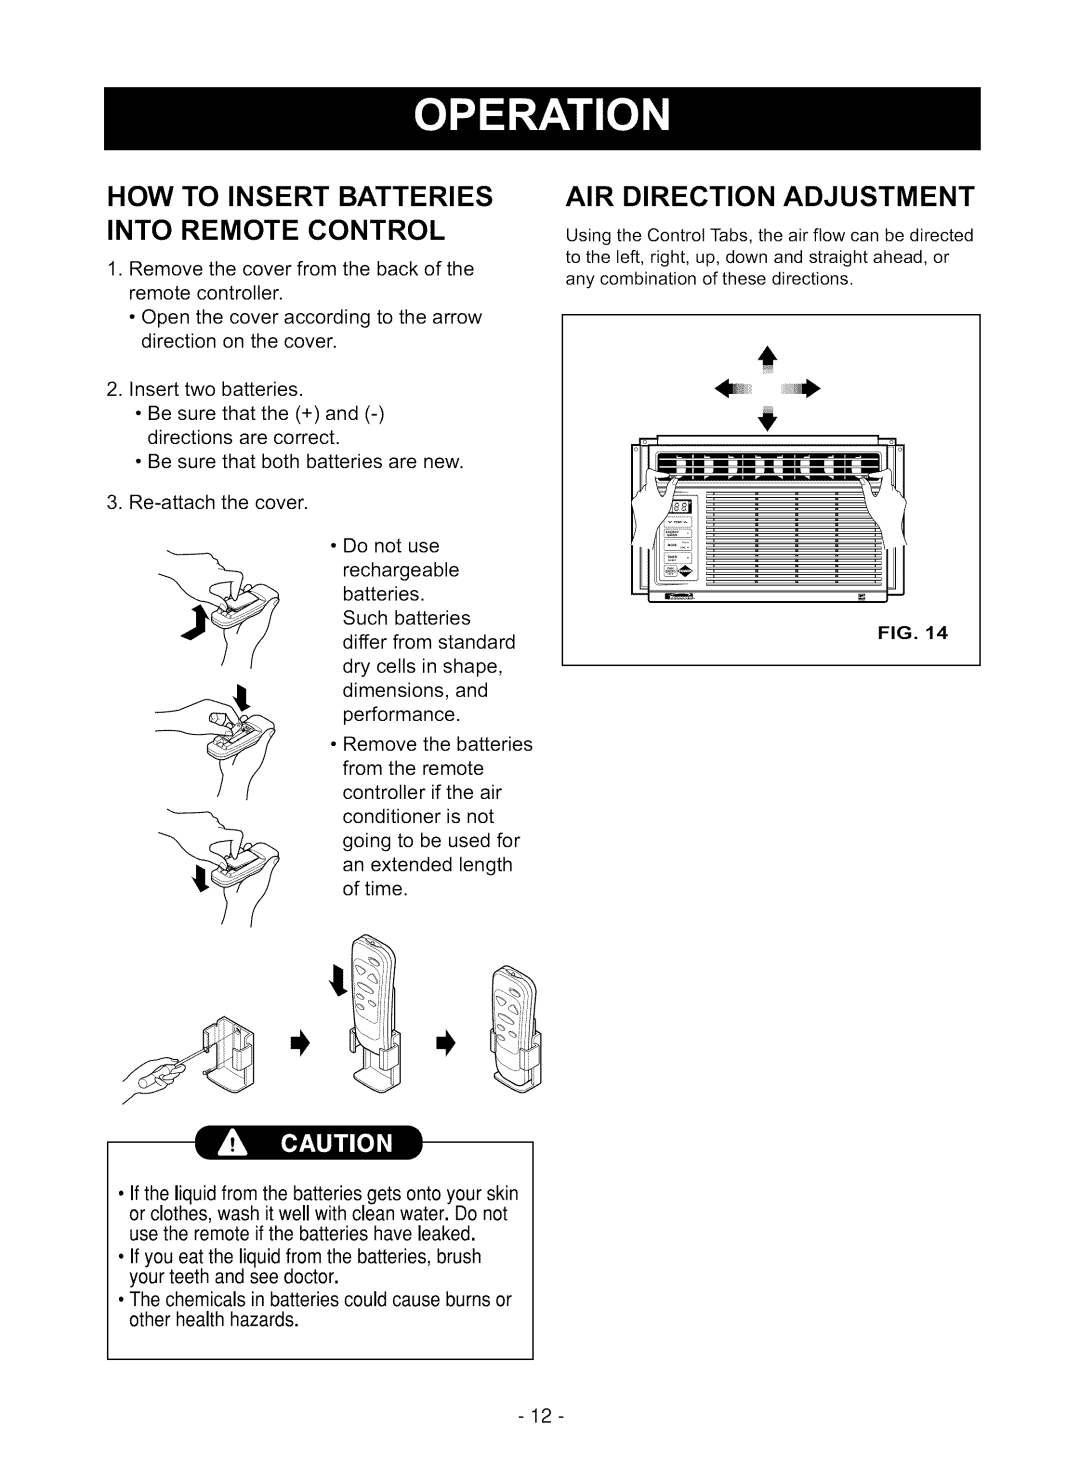 Kenmore 580.75051 owner manual I oJ, How To Insert Batteries Into Remote Control, Air Direction Adjustment 